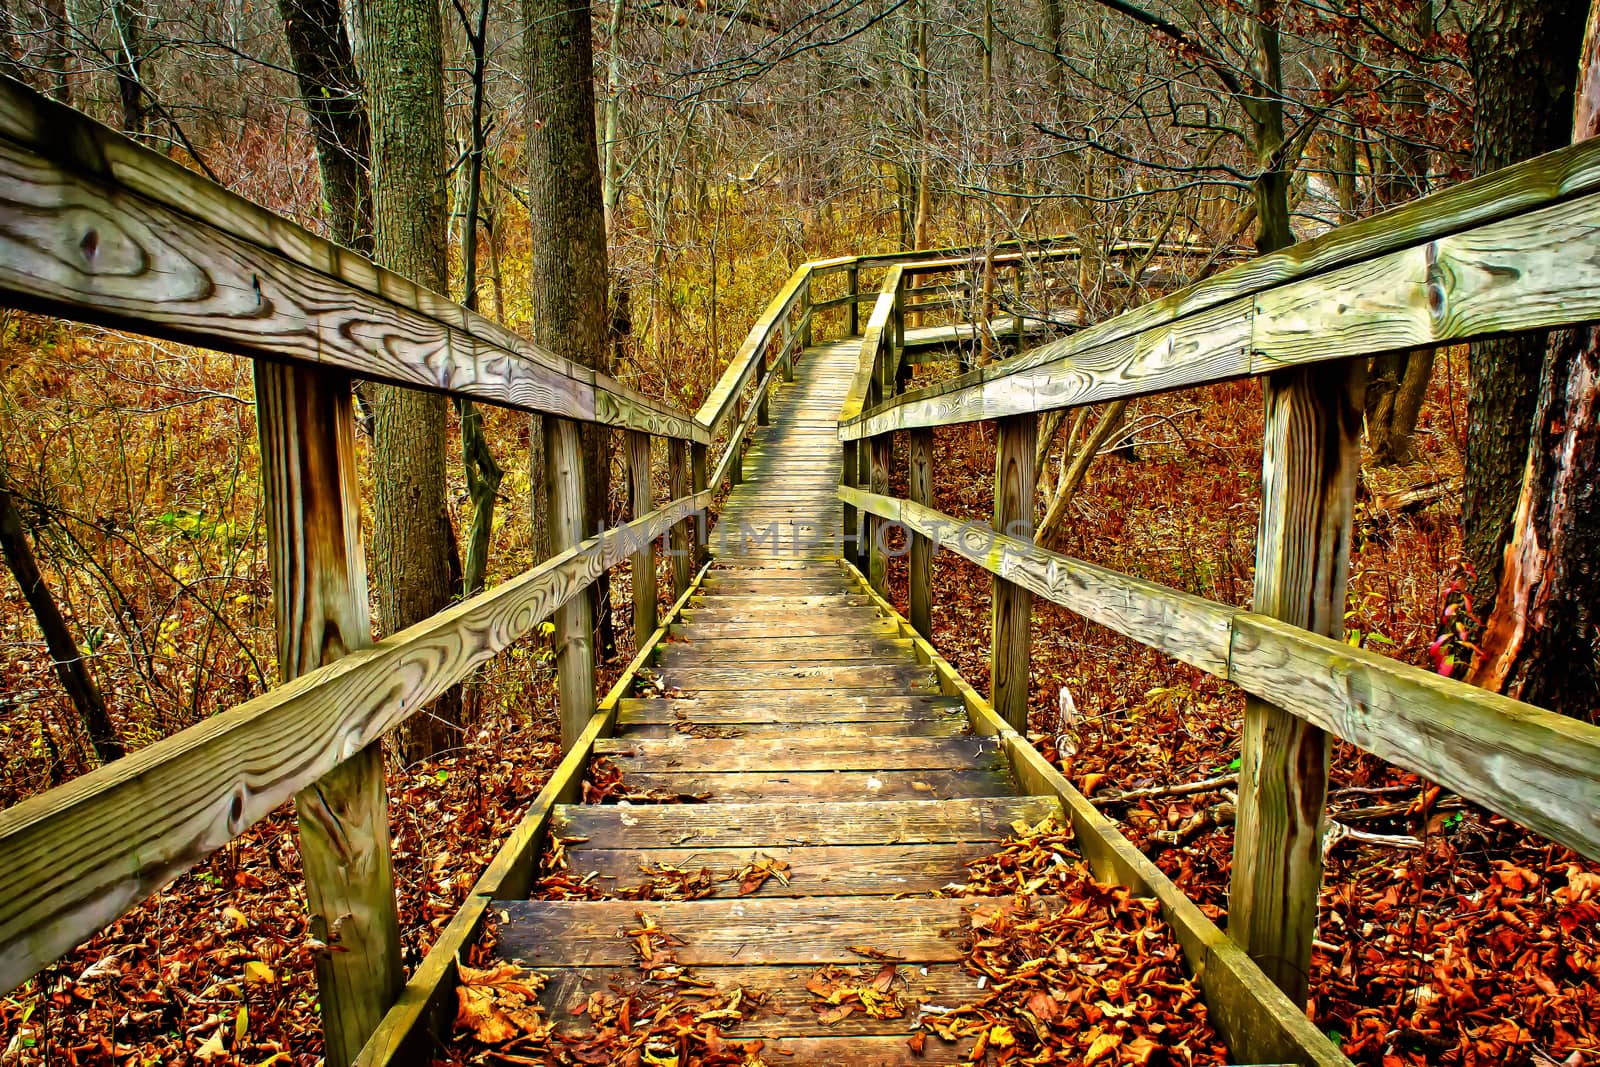 Wooden walkway through an autumn forest. Beautiful golden leaves surround stairs. 